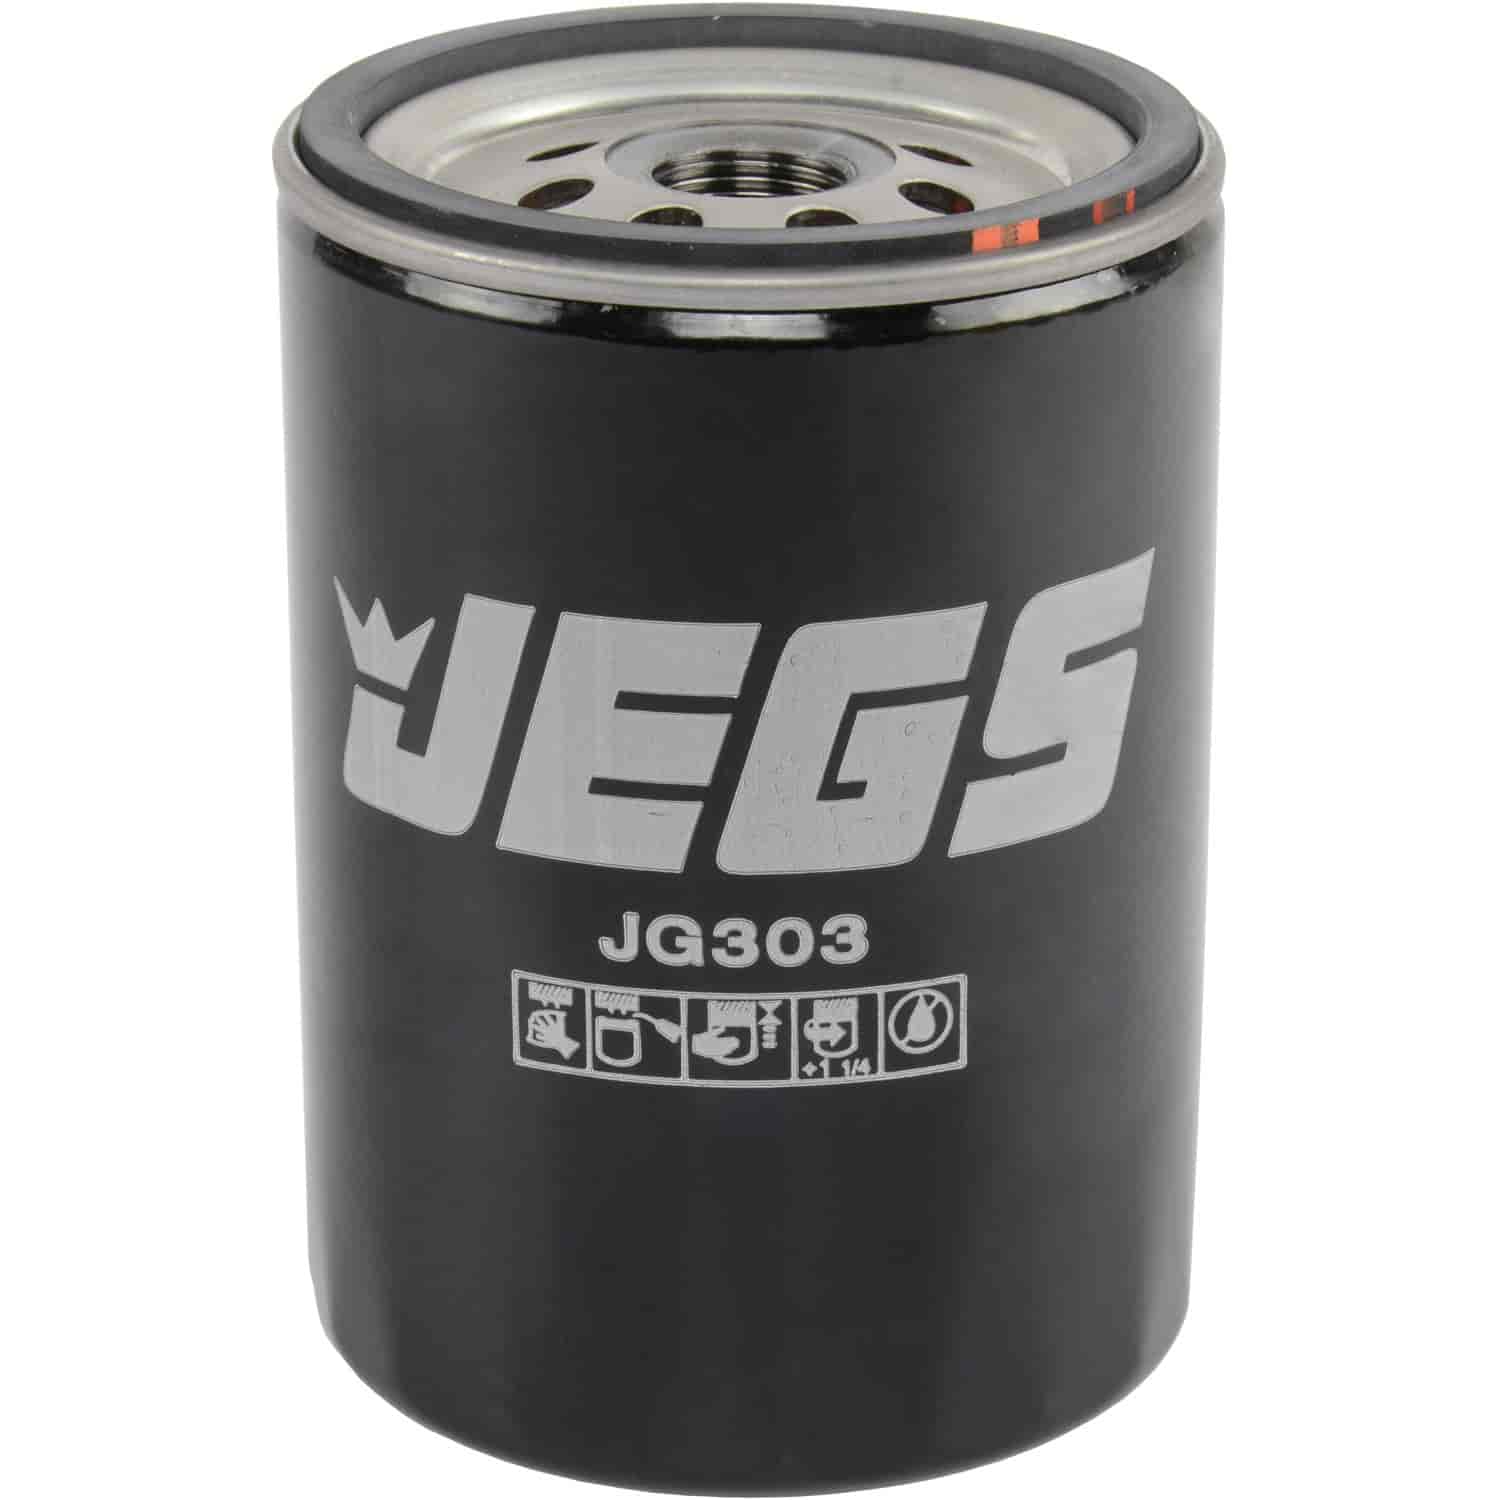 Performance GM Oil Filter, 5.33 in. High, 13/16 in.-16 UNF Thread